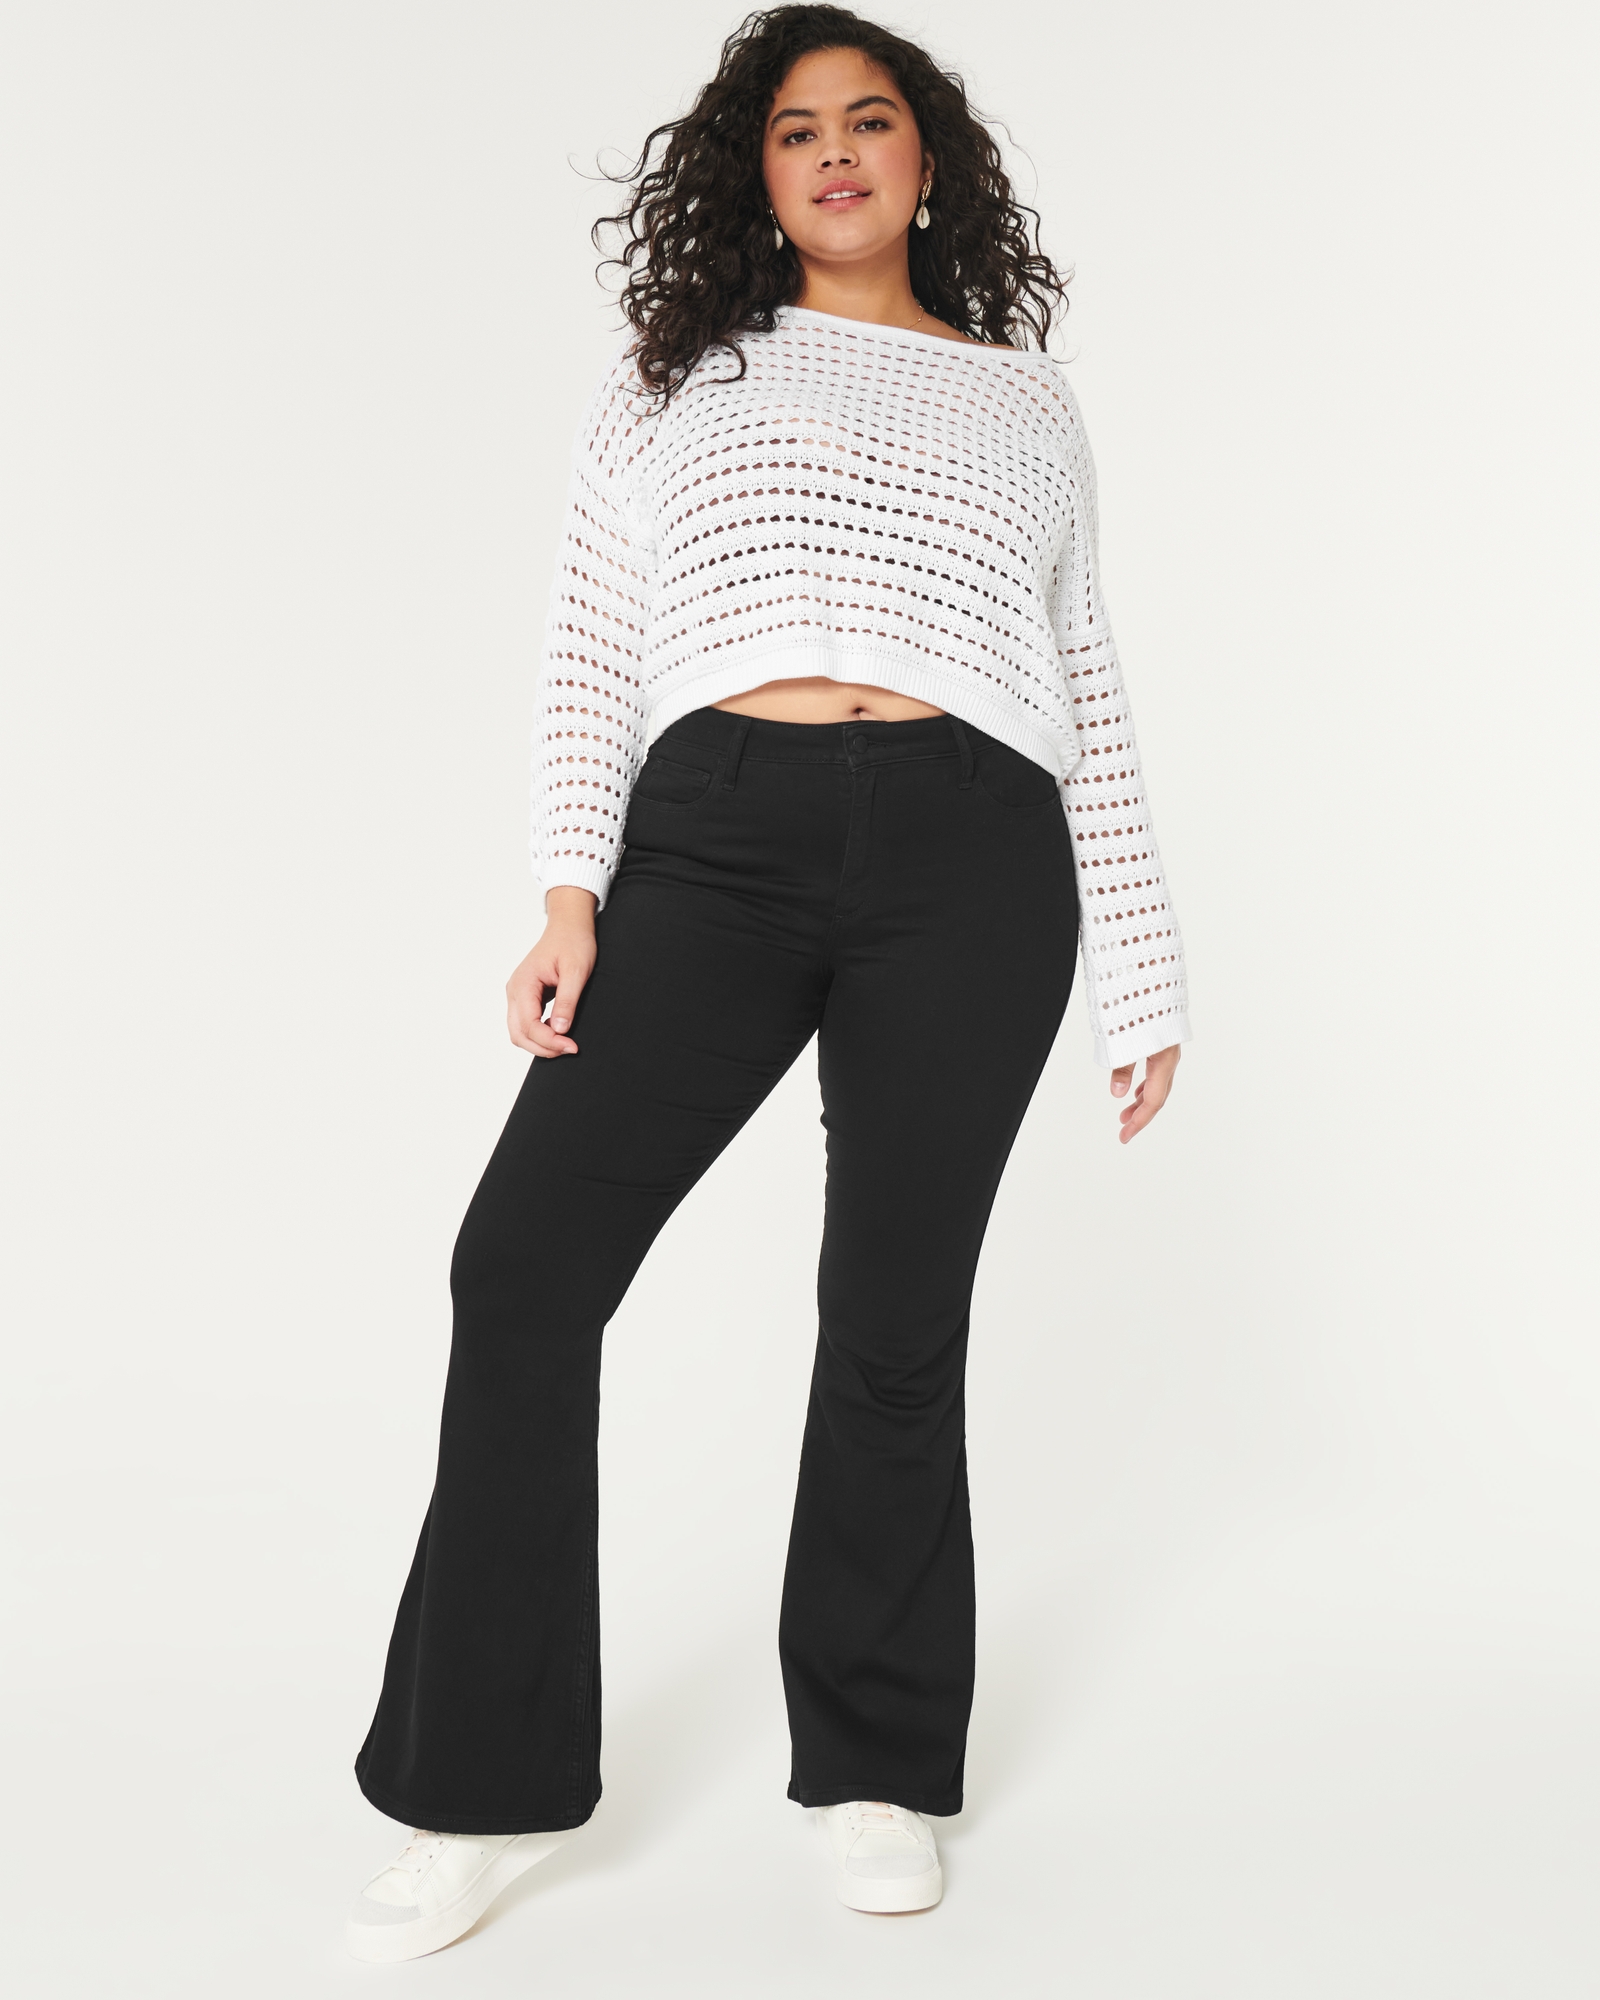 Hollister Juniors Flare Jeans On Sale Up To 90% Off Retail